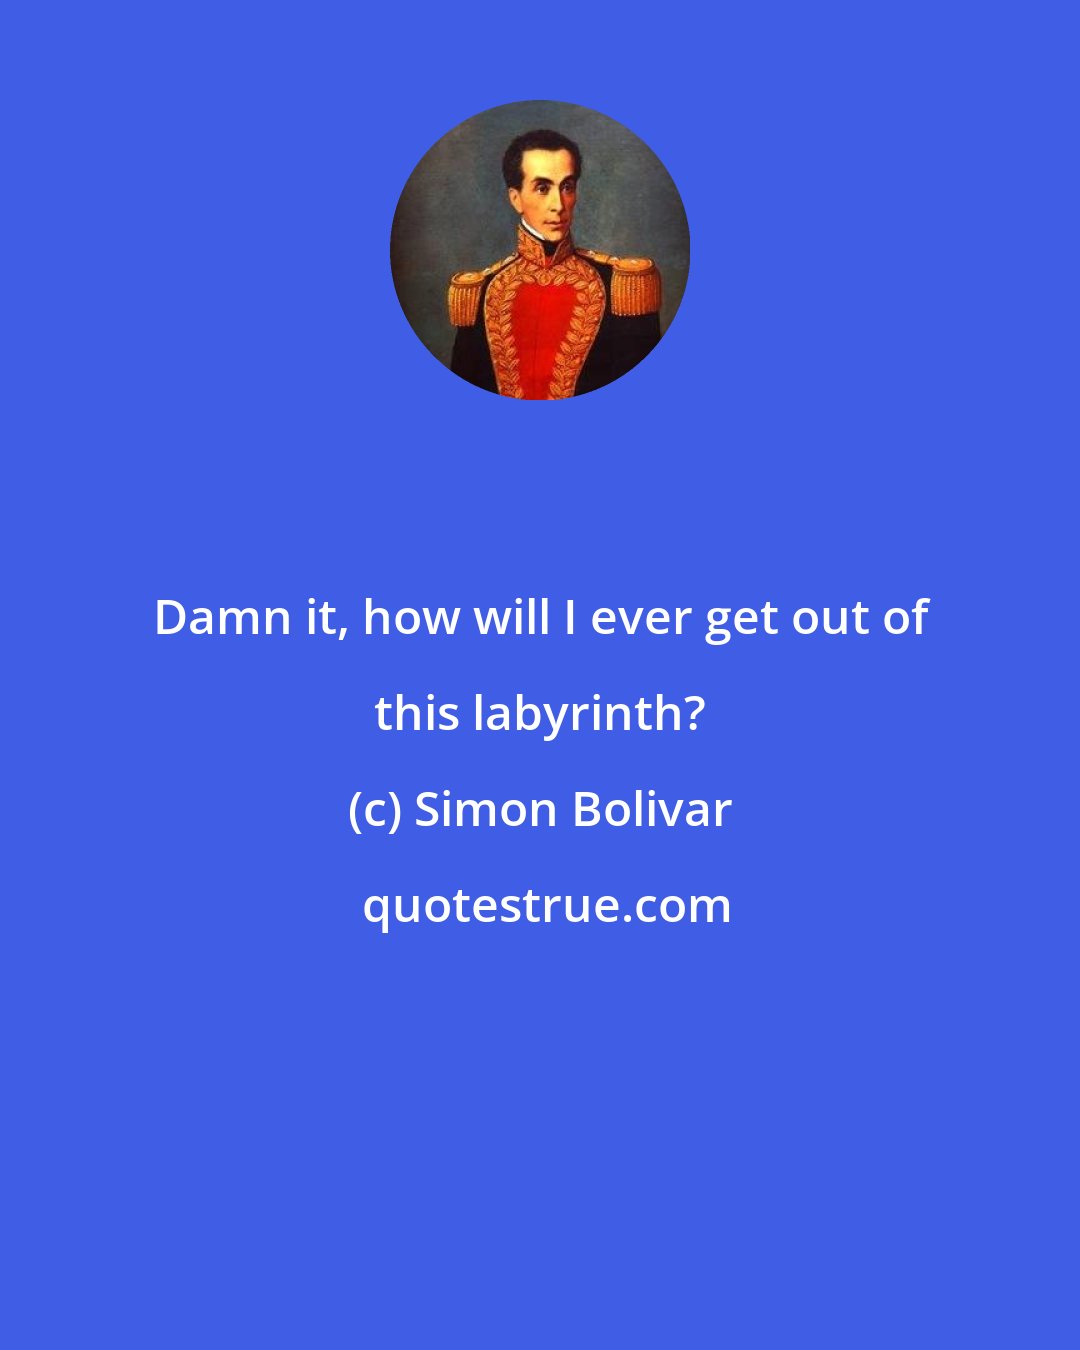 Simon Bolivar: Damn it, how will I ever get out of this labyrinth?